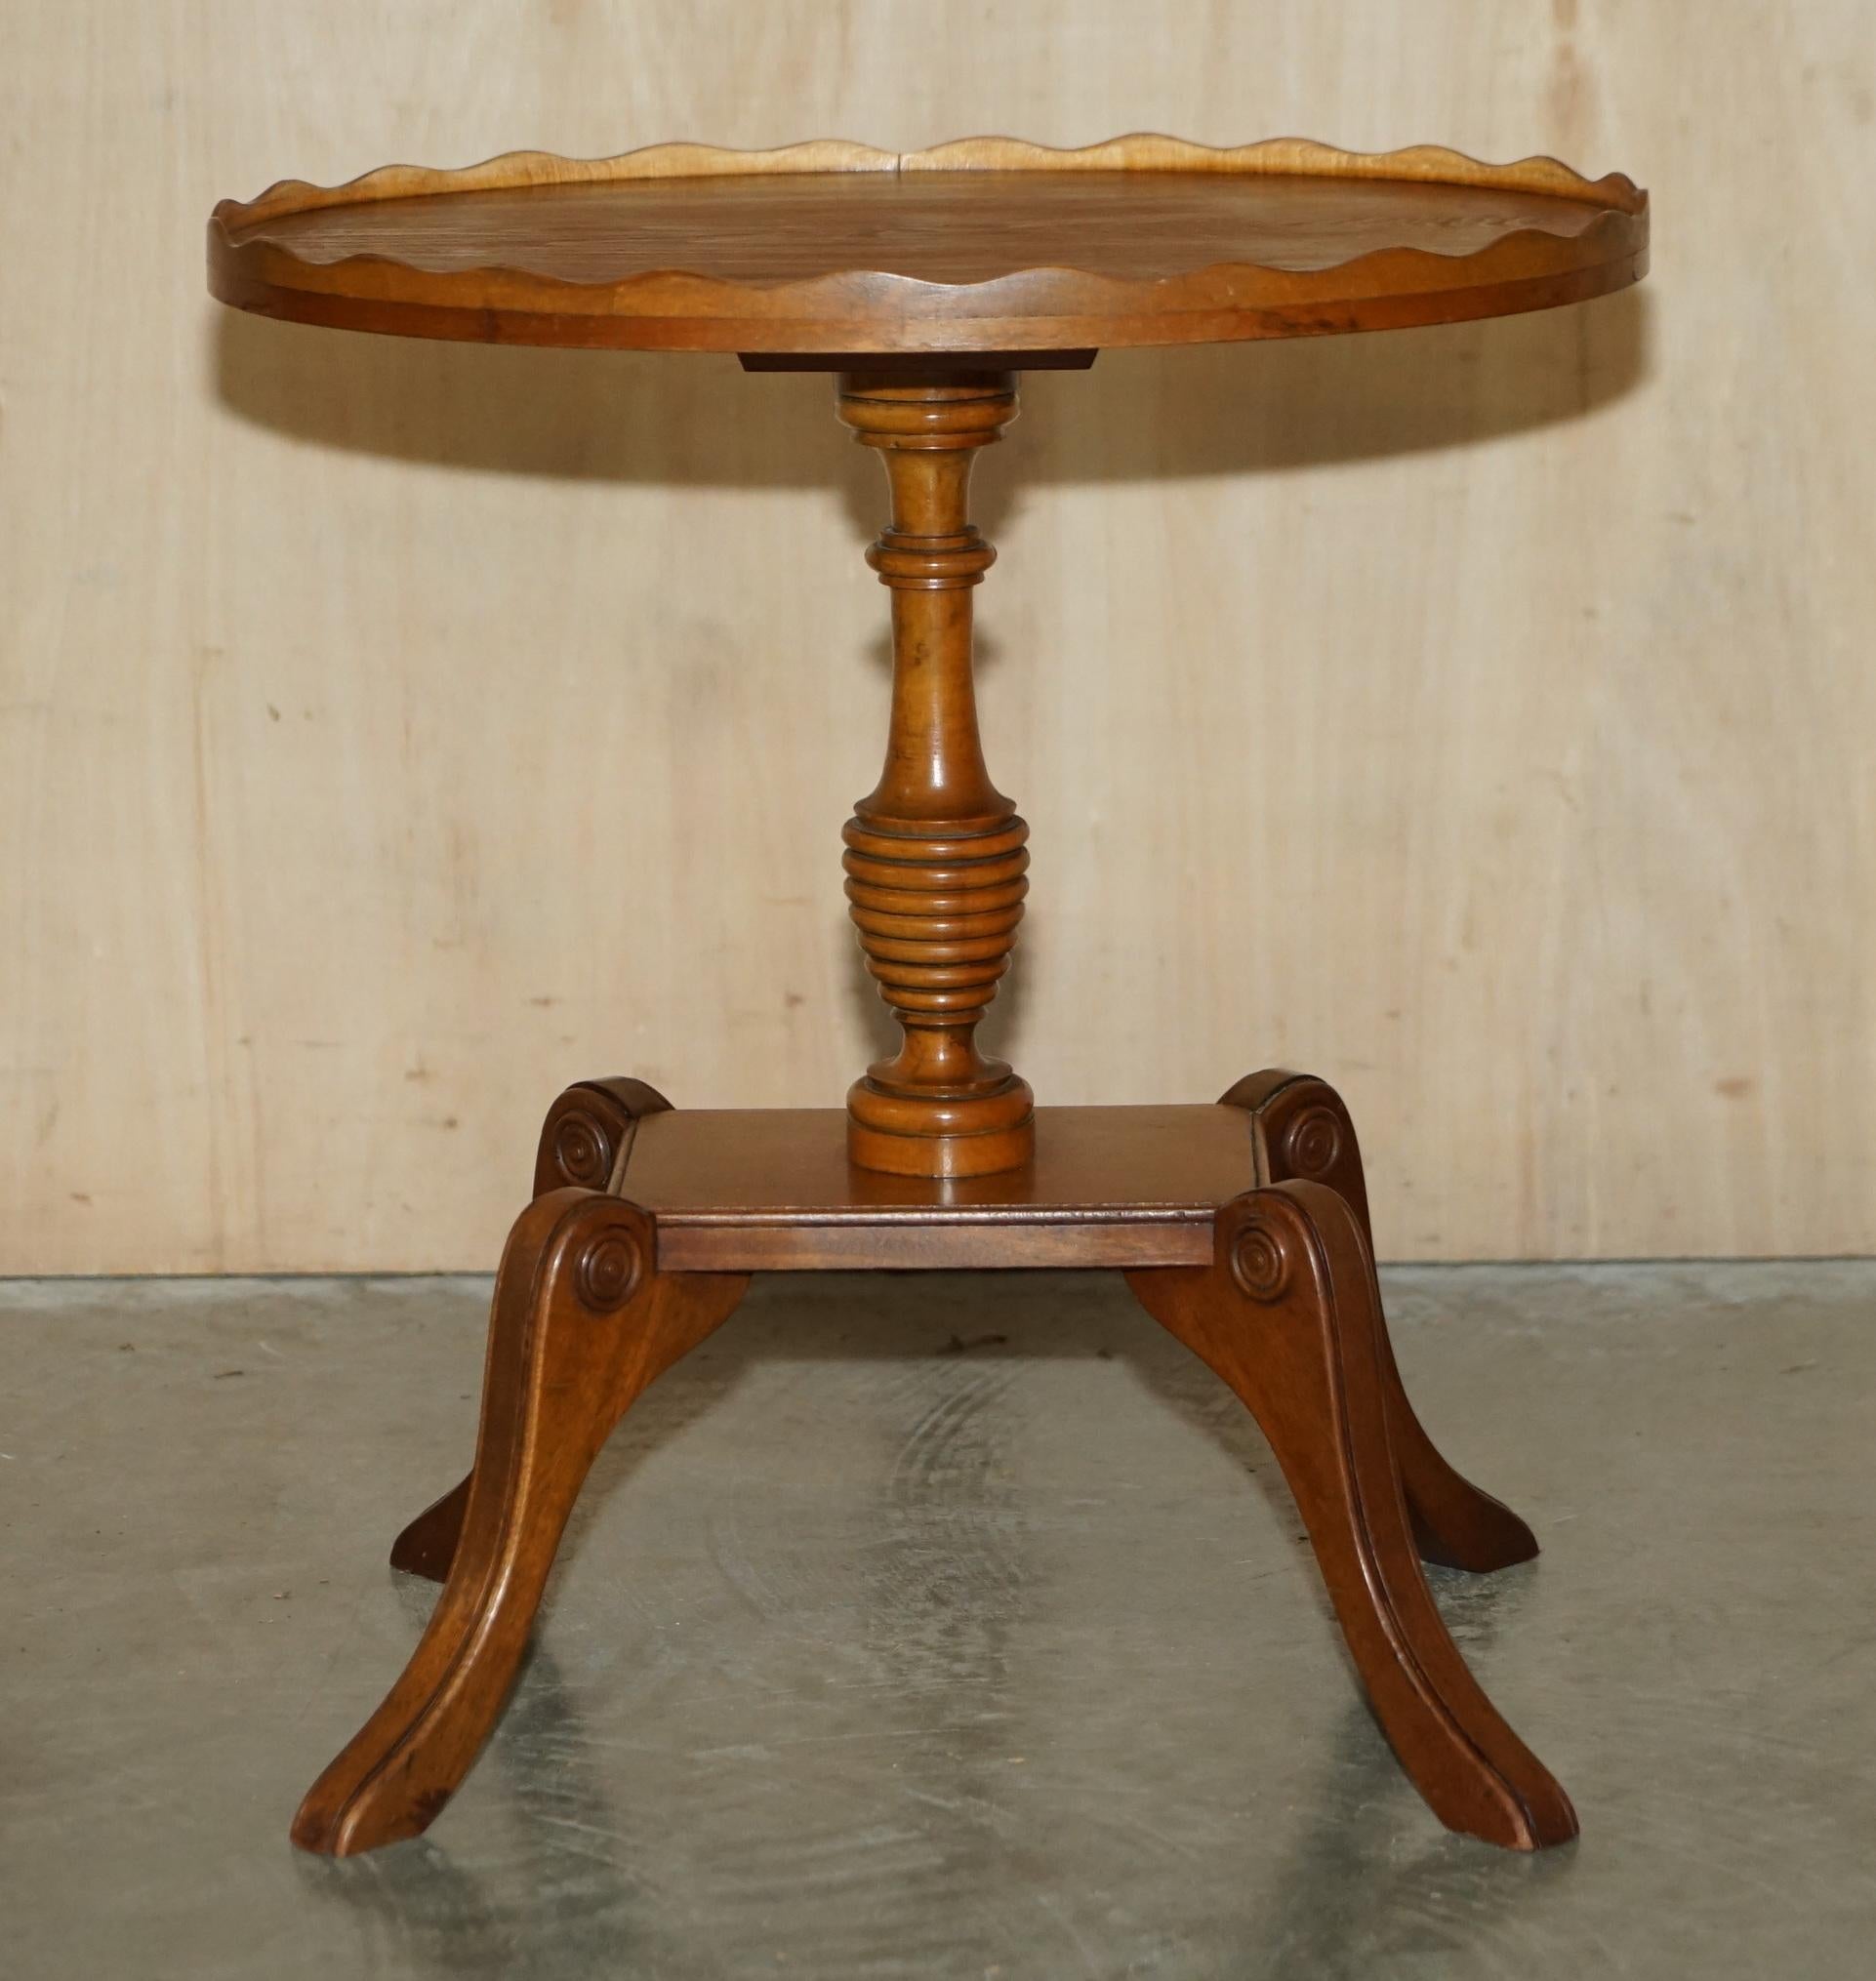 Pair of Burr Yew Wood Beresford & Hicks Side End Lamp Tables with Gallery Rail For Sale 7